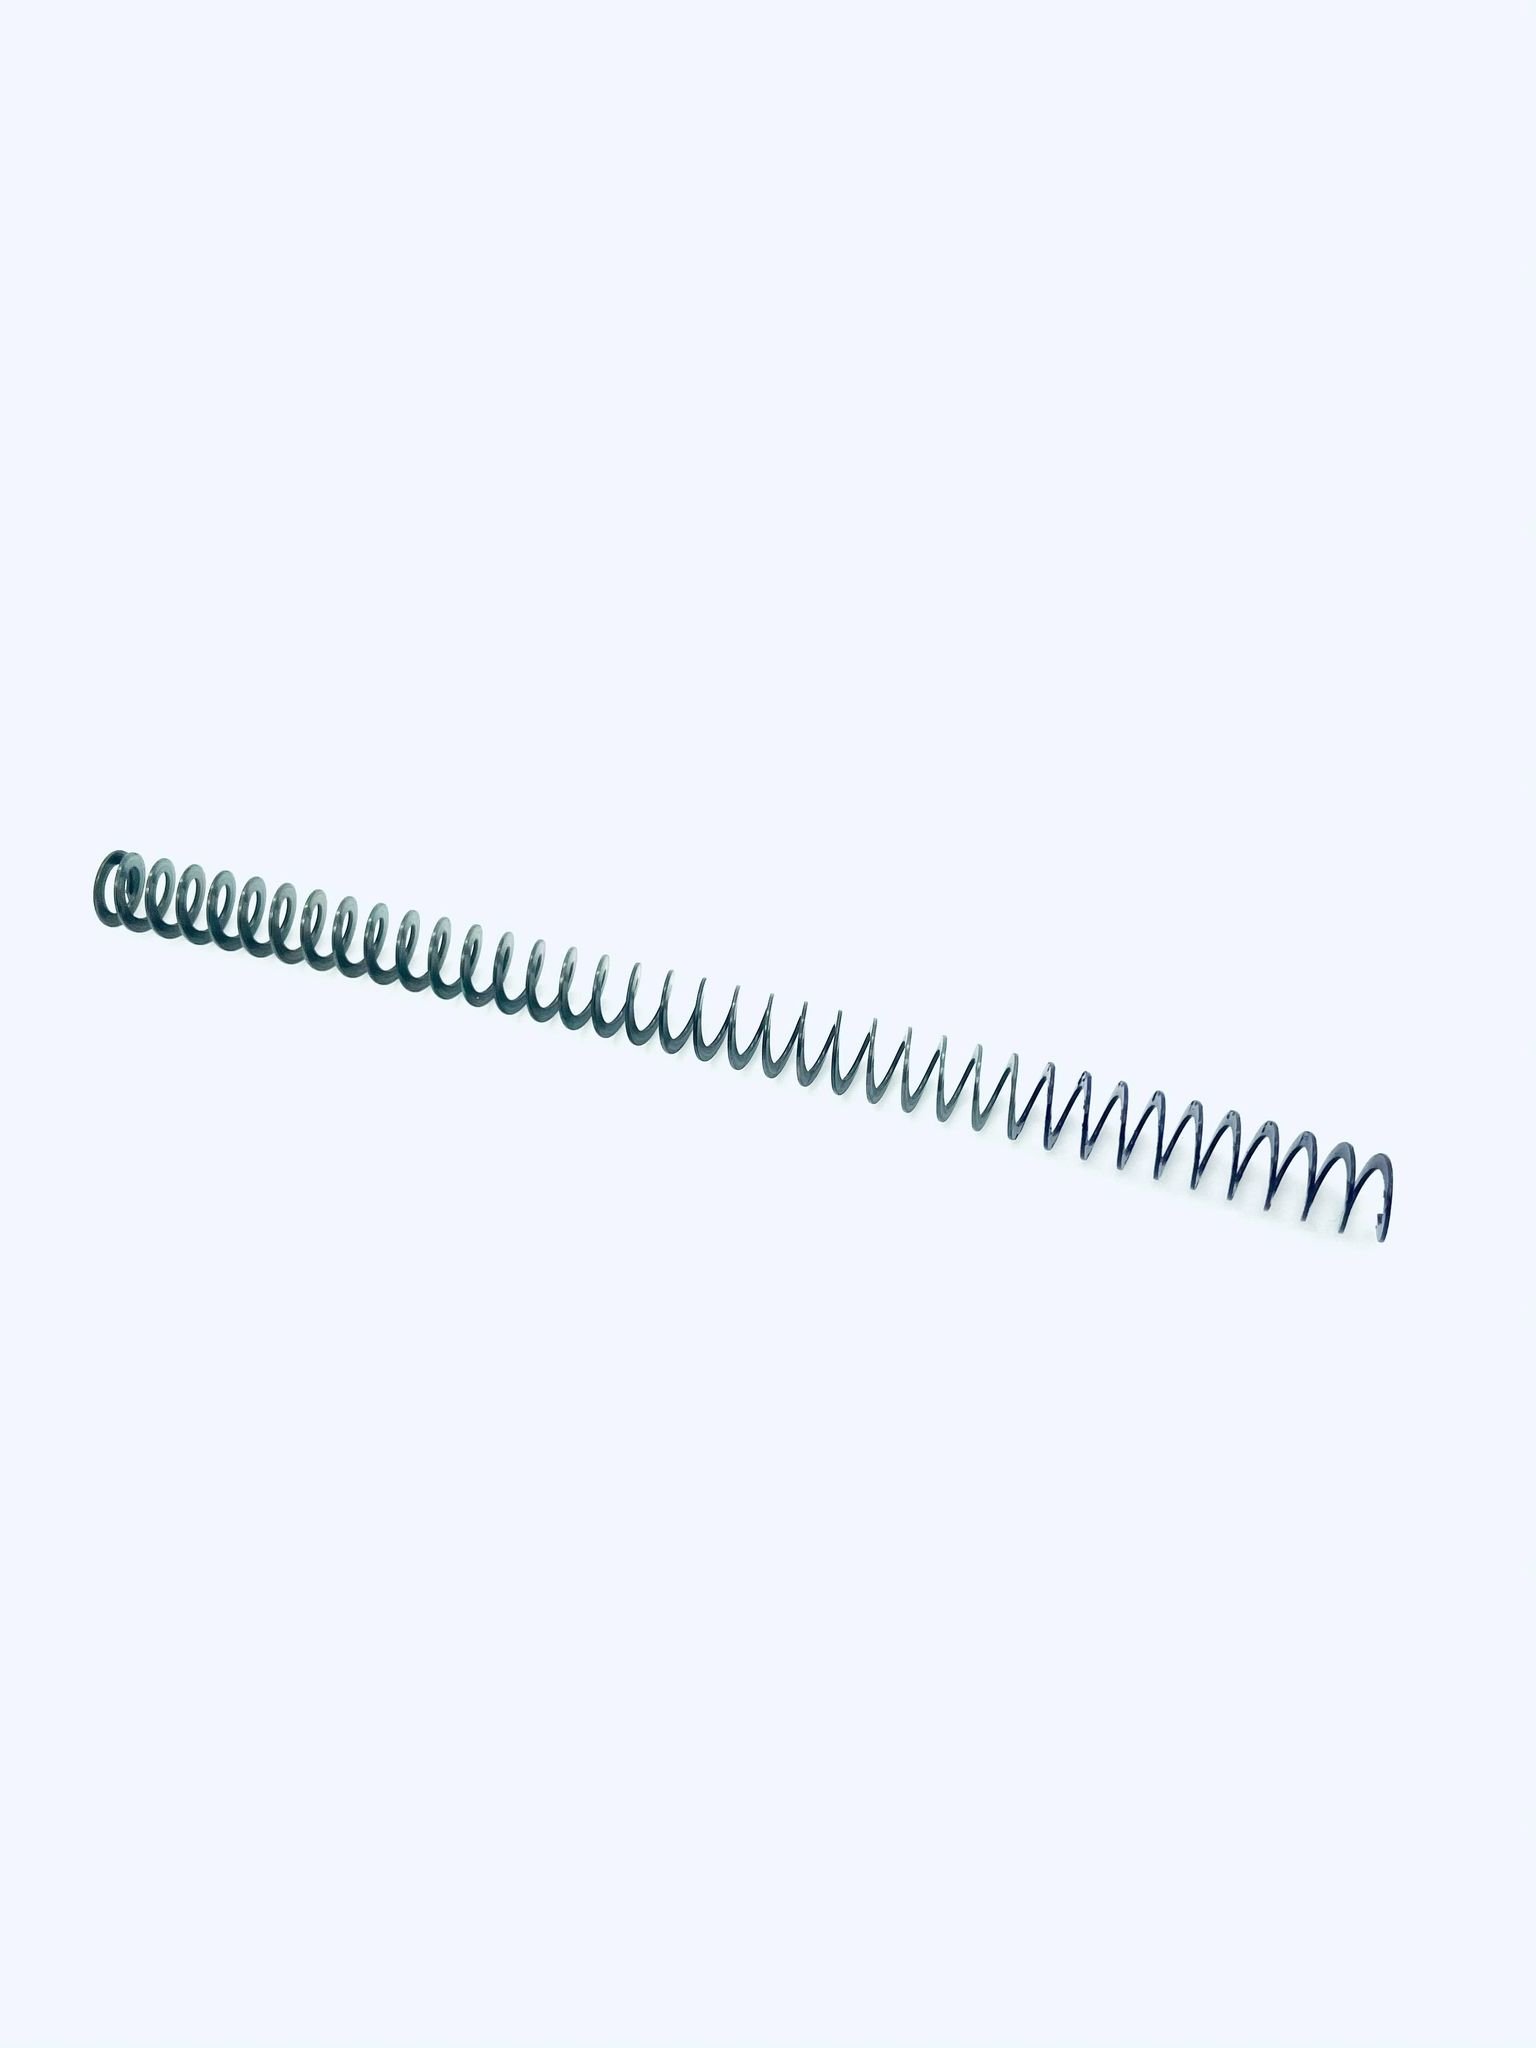 Recoil spring, full size, P320